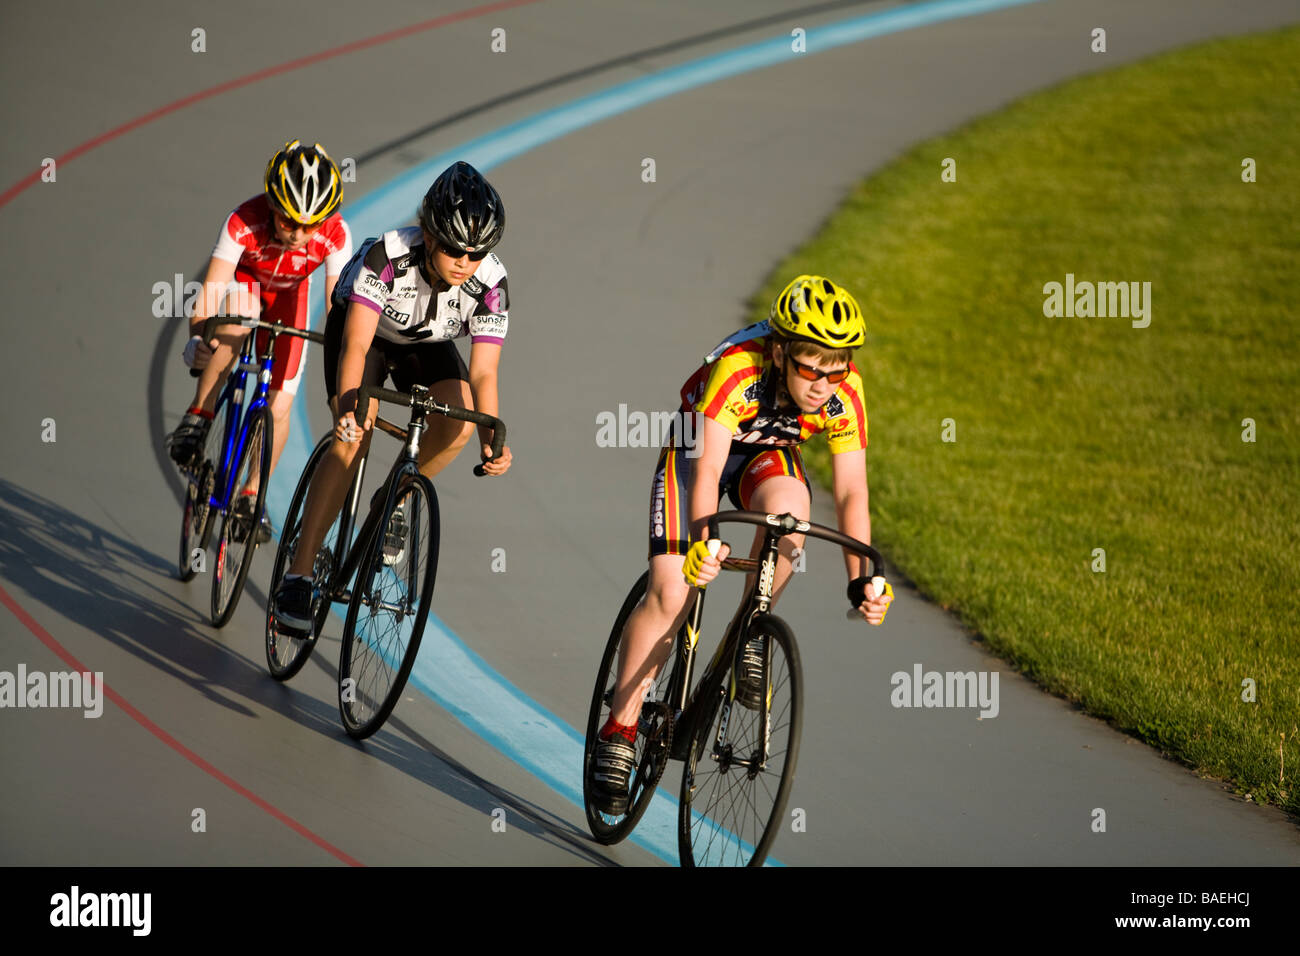 ILLINOIS Northbrook Three young male bicyclists in bicycle race at velodrome track Stock Photo